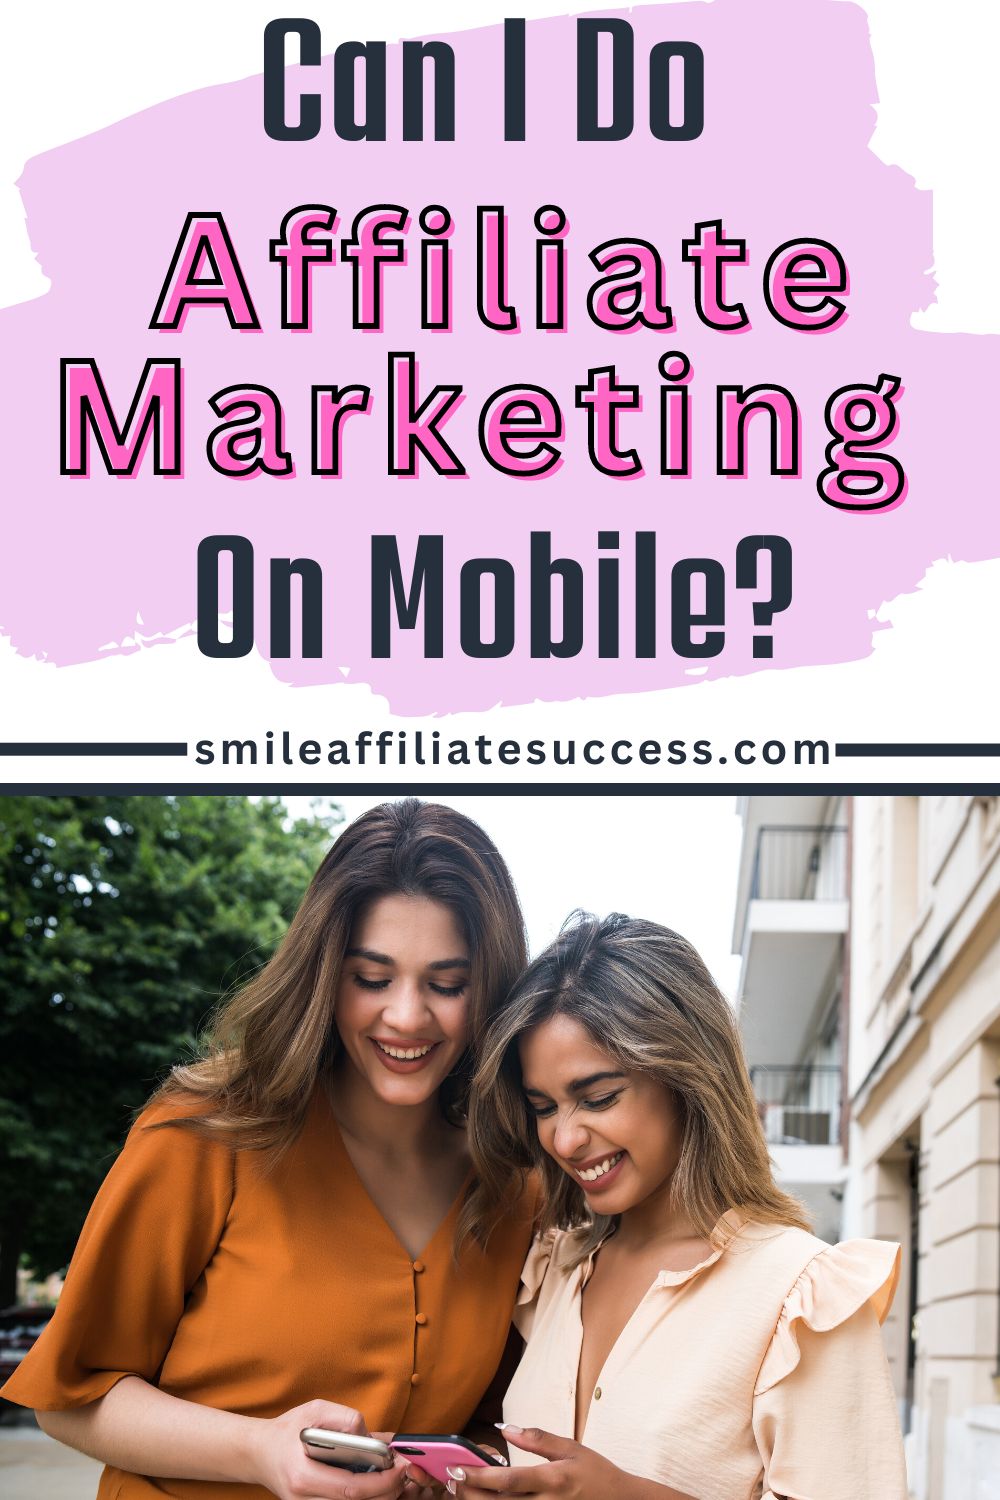 Can I Do Affiliate Marketing On Mobile?